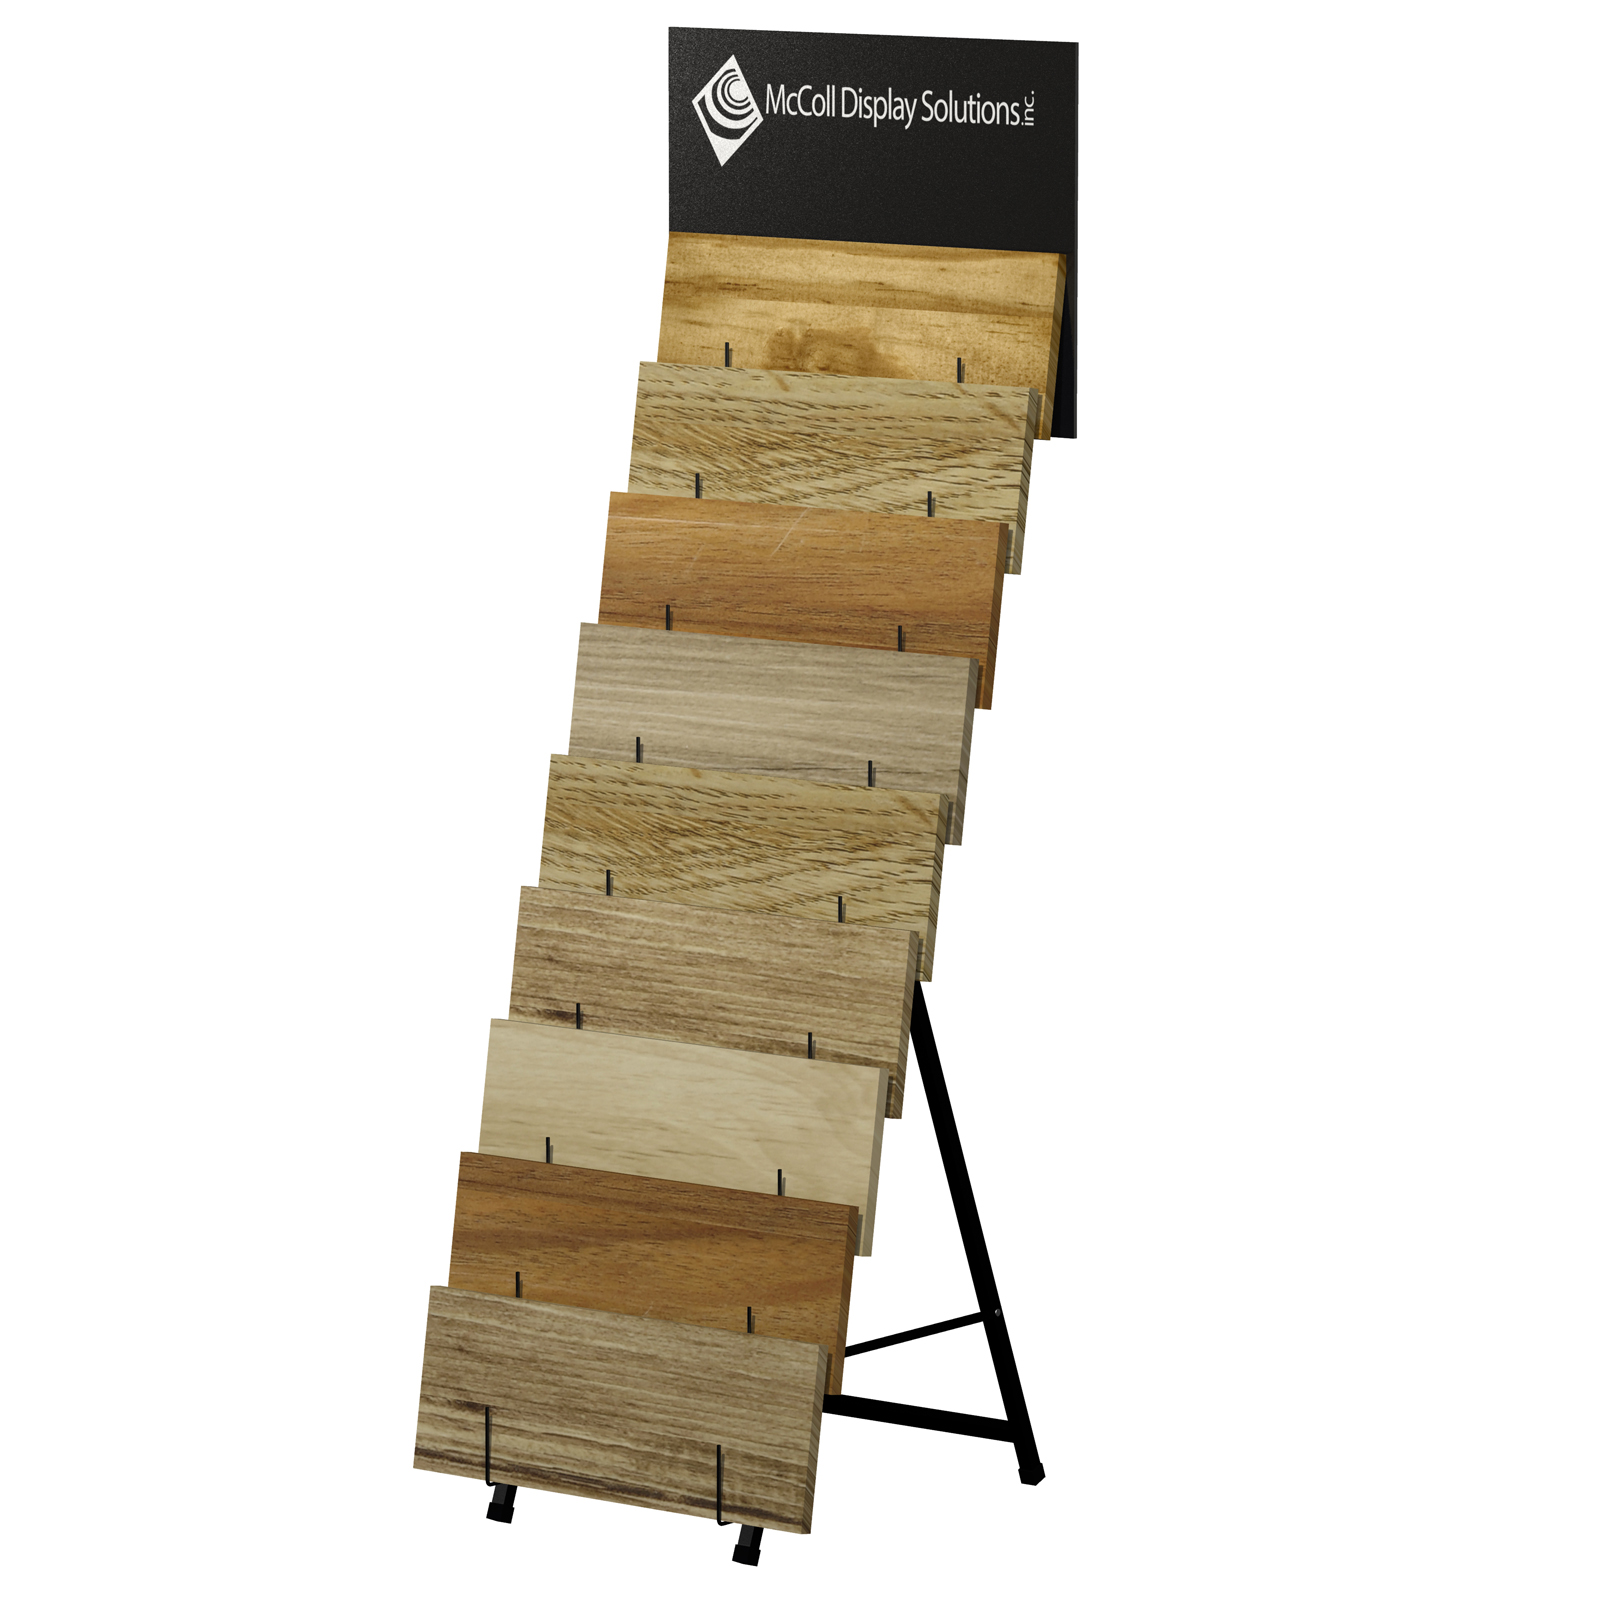 A99 Steel Frame Easel Display for Plank Hardwood and Laminate Samples Folds Easily for Tradeshow Use